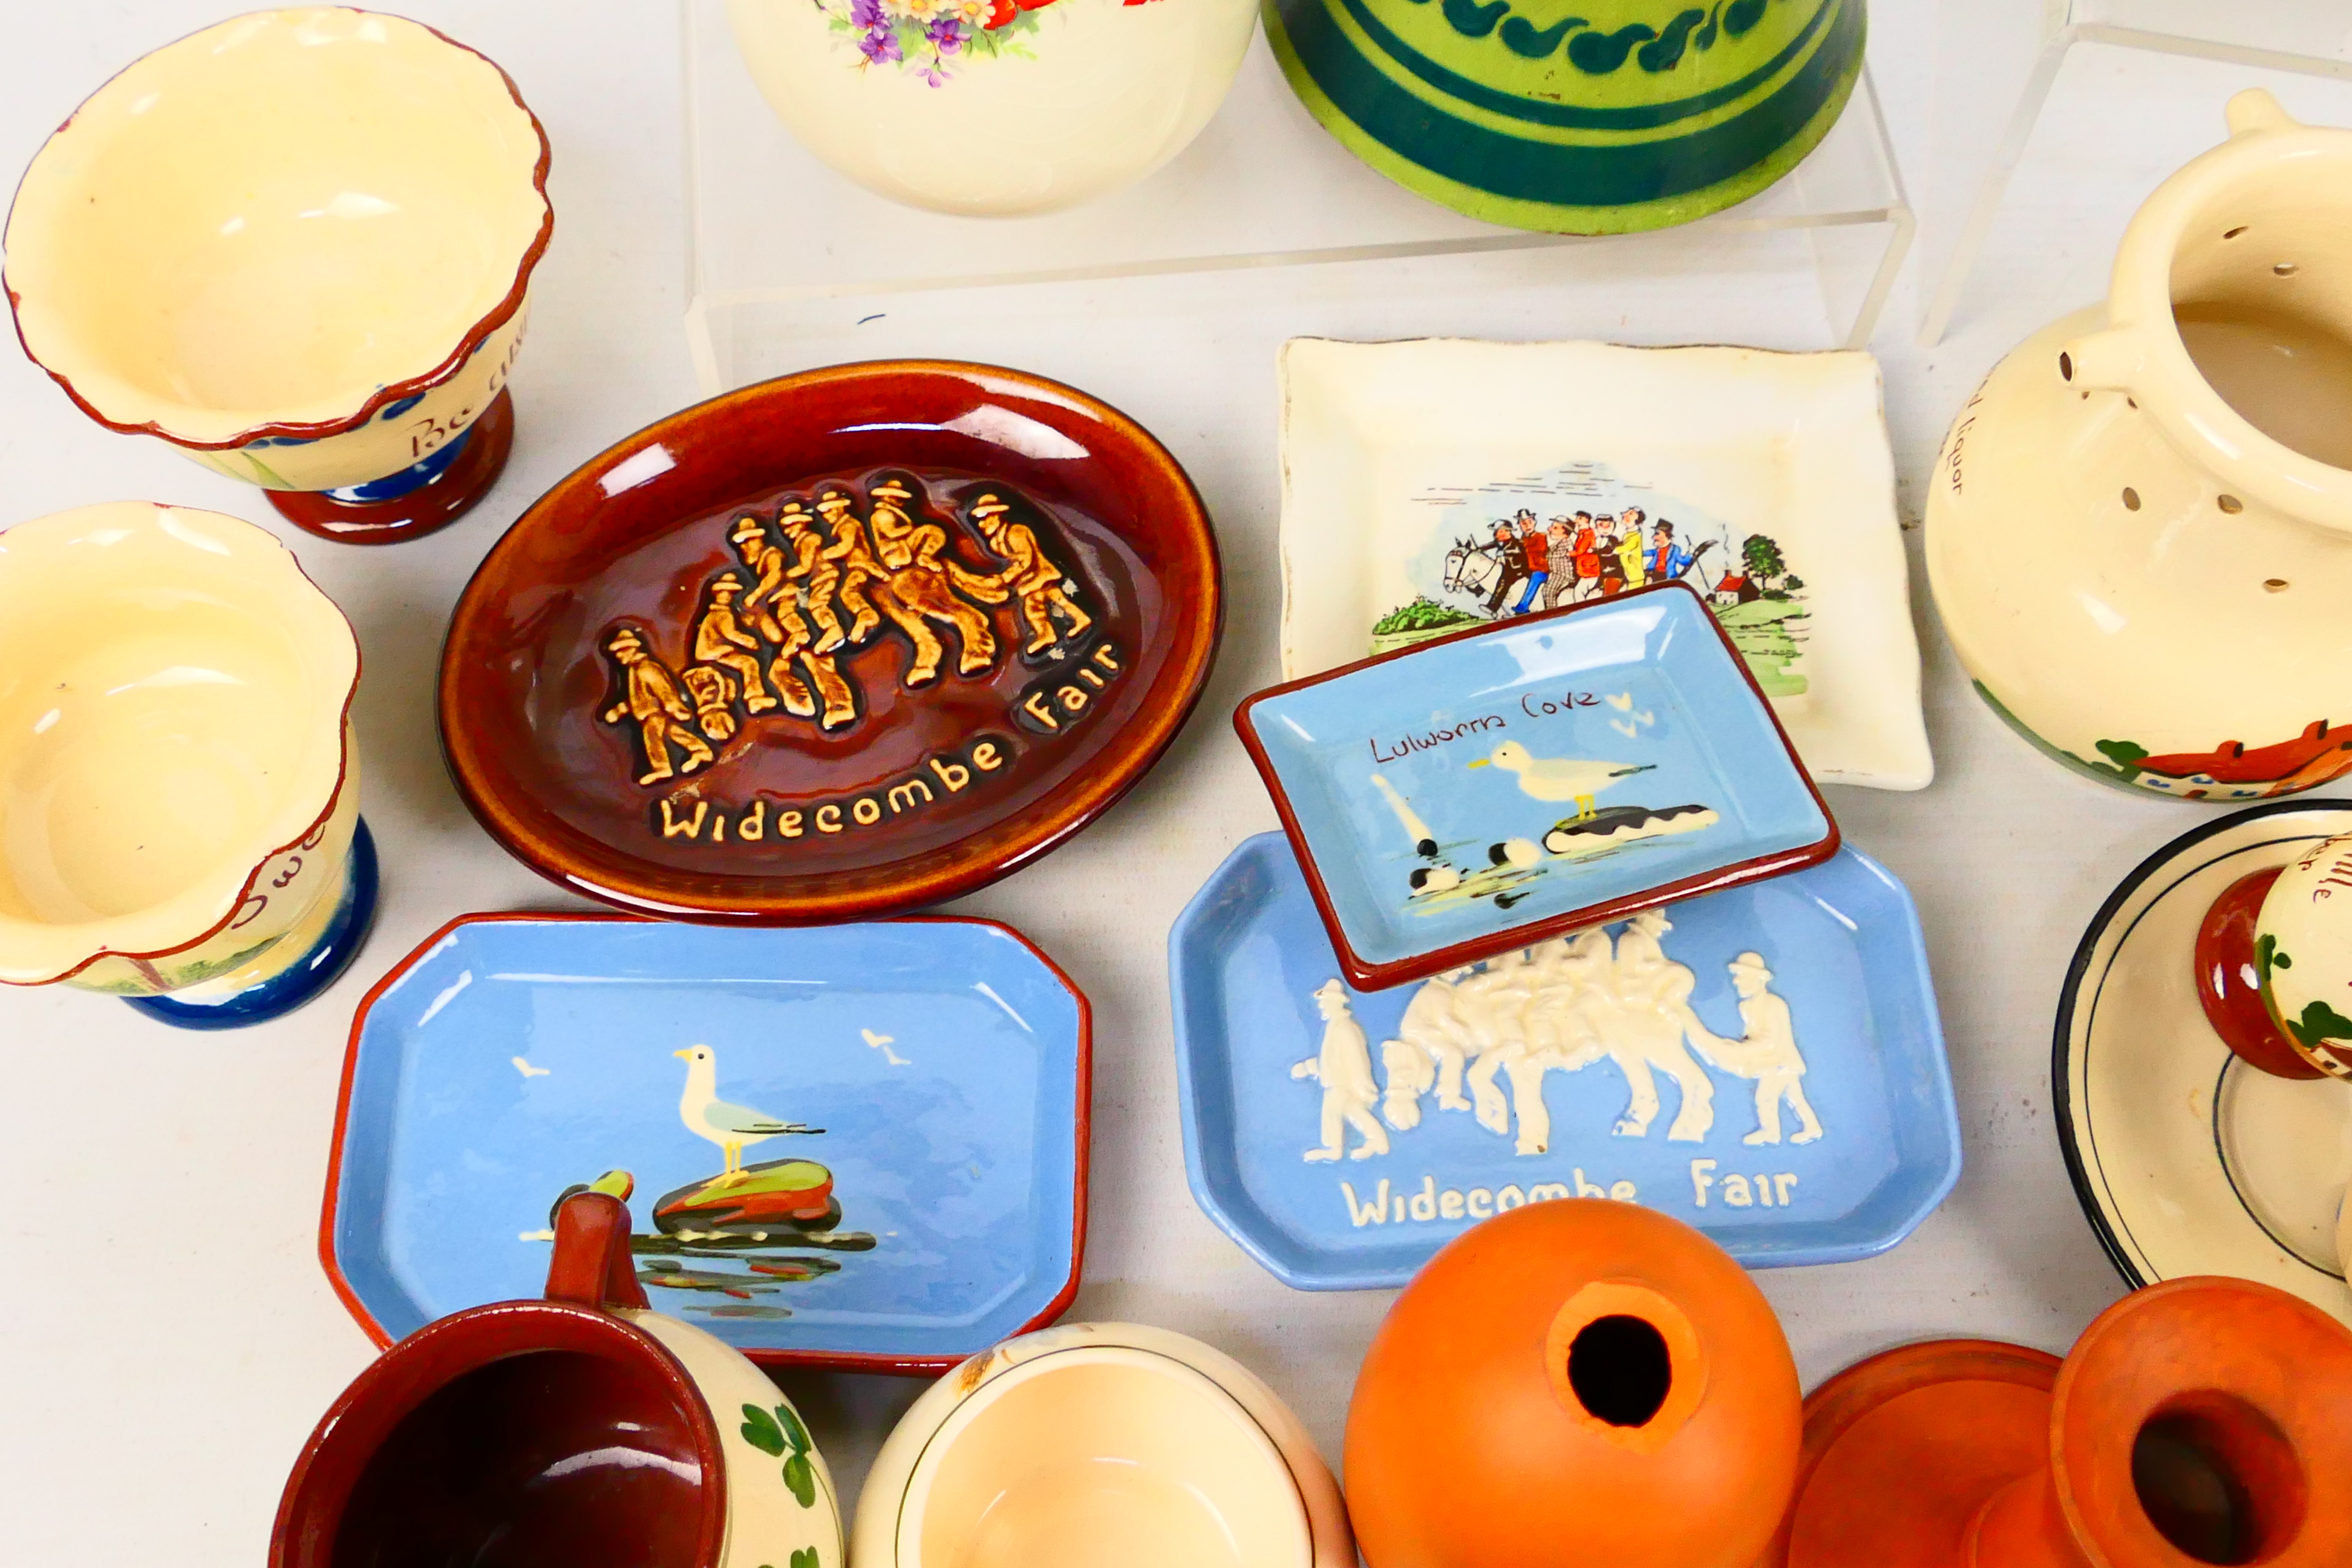 A collection of Torquay pottery wares to include bowls, jugs, vases, - Image 4 of 8